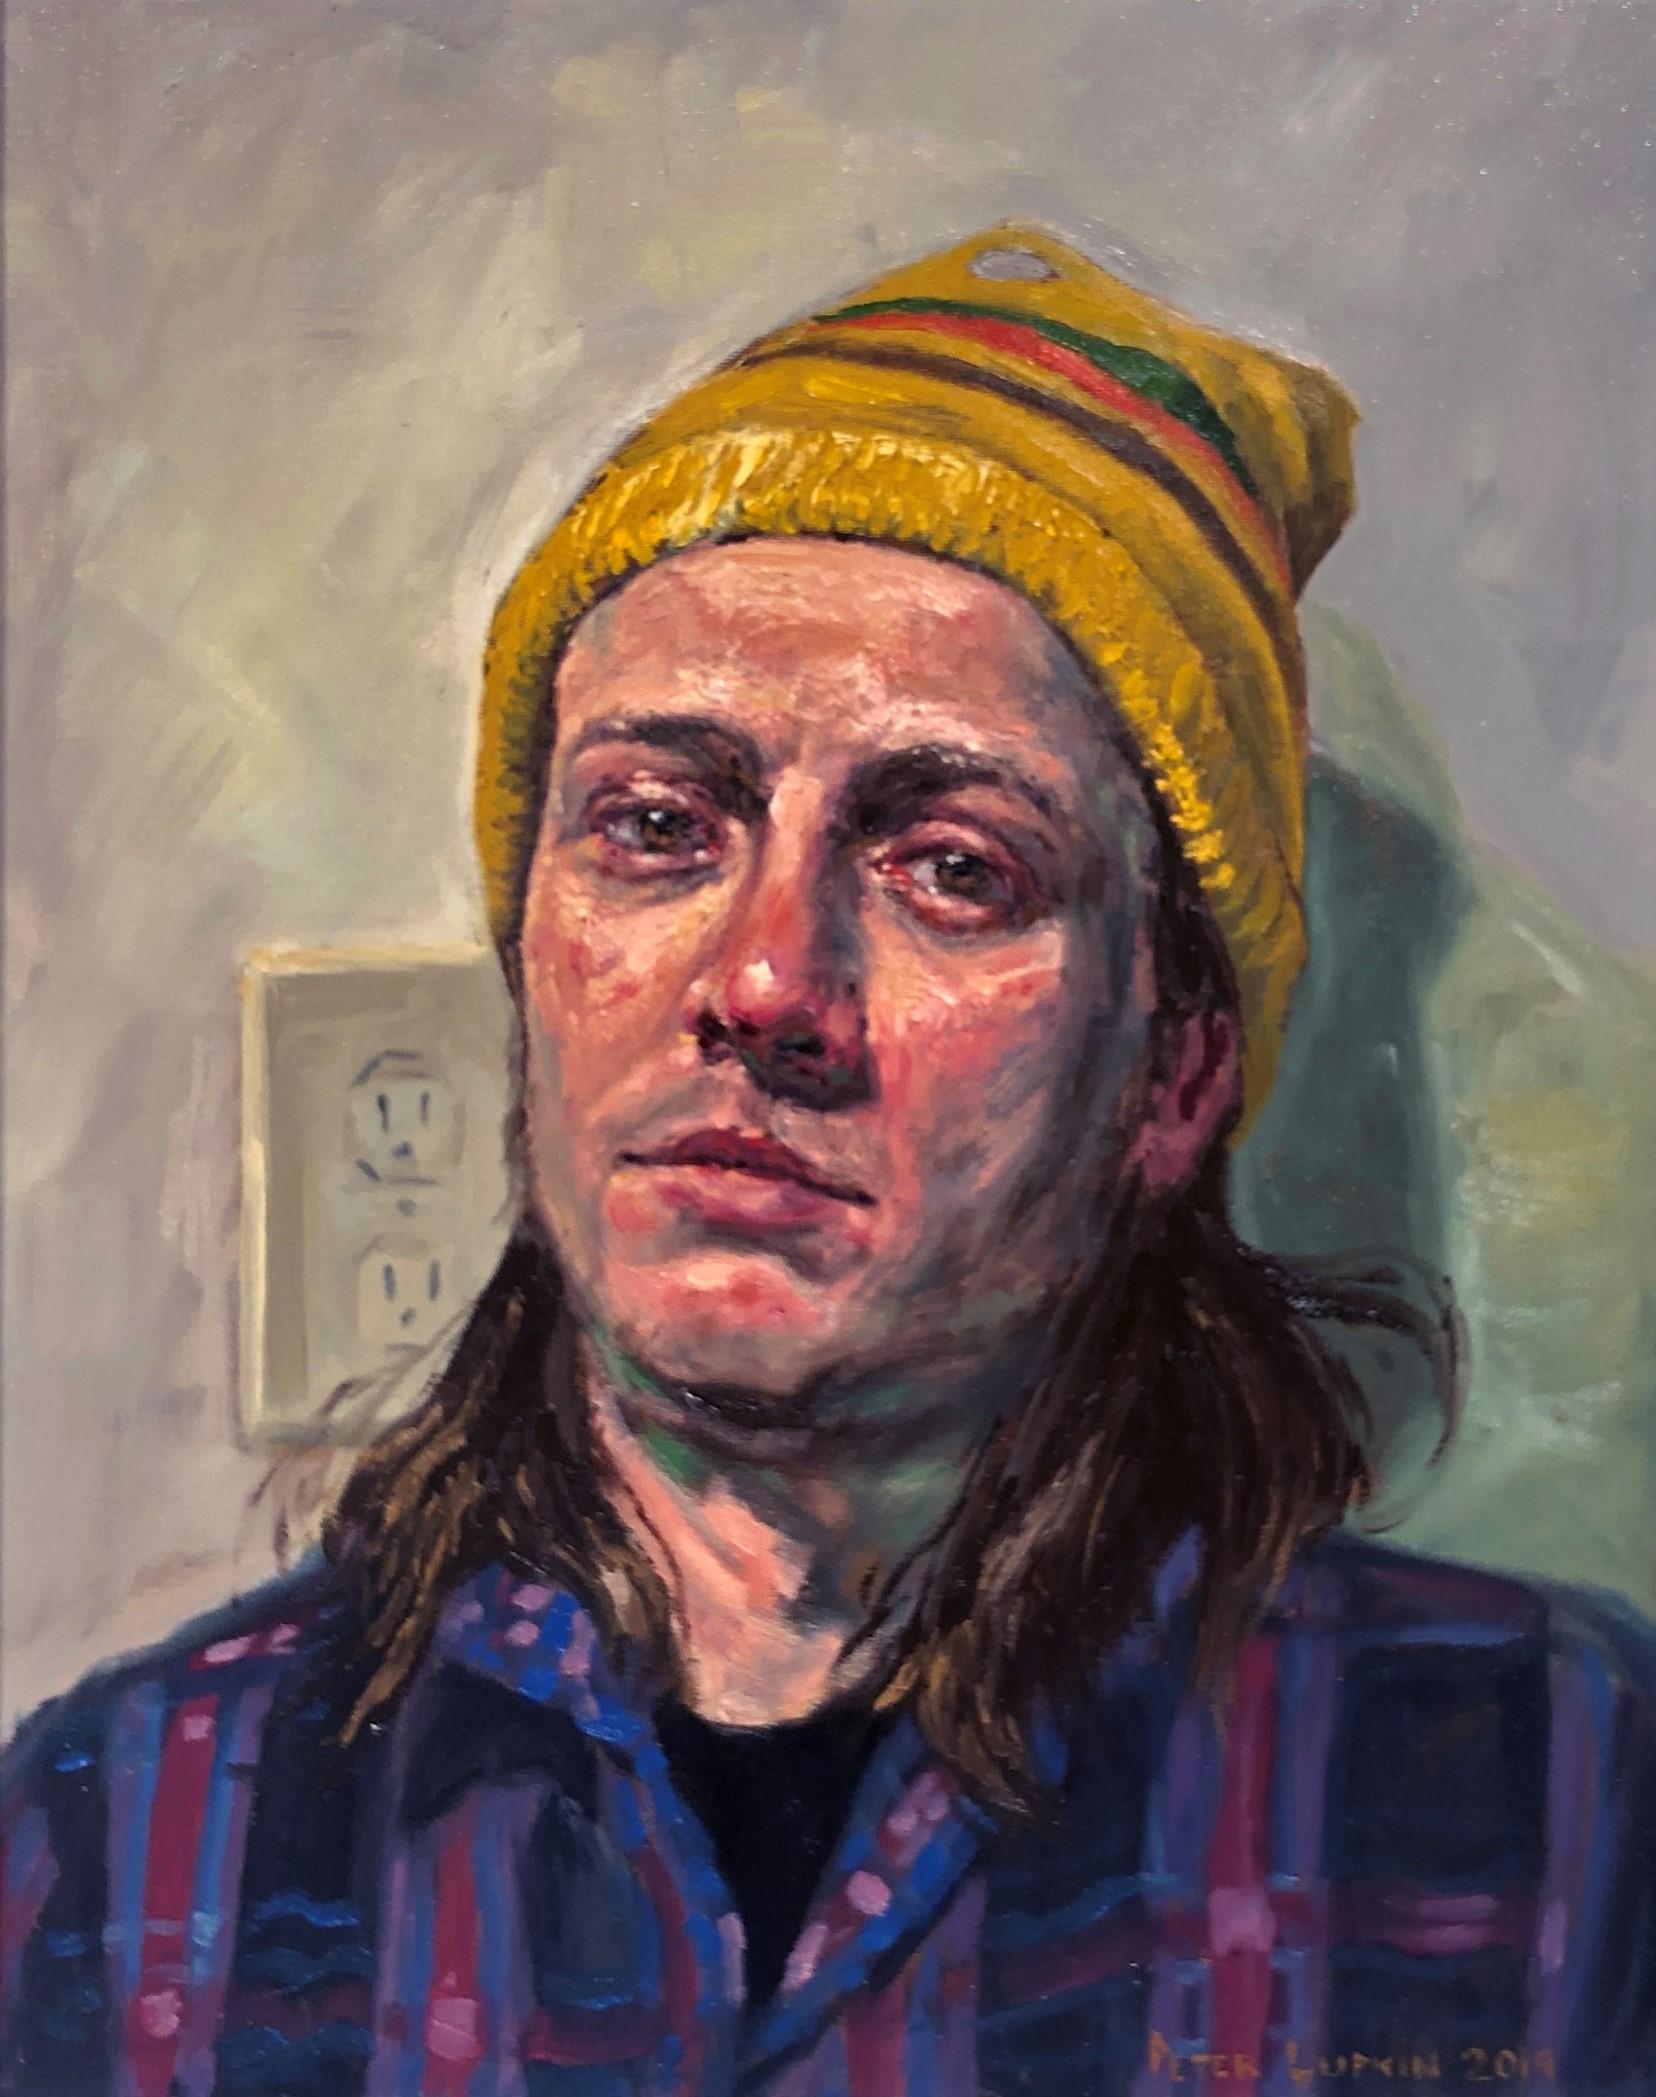 Peter Lupkin Figurative Painting - Hamburger Hat, Portrait of a Guy Wearing a Purple Shirt and Yellow Hat, framed